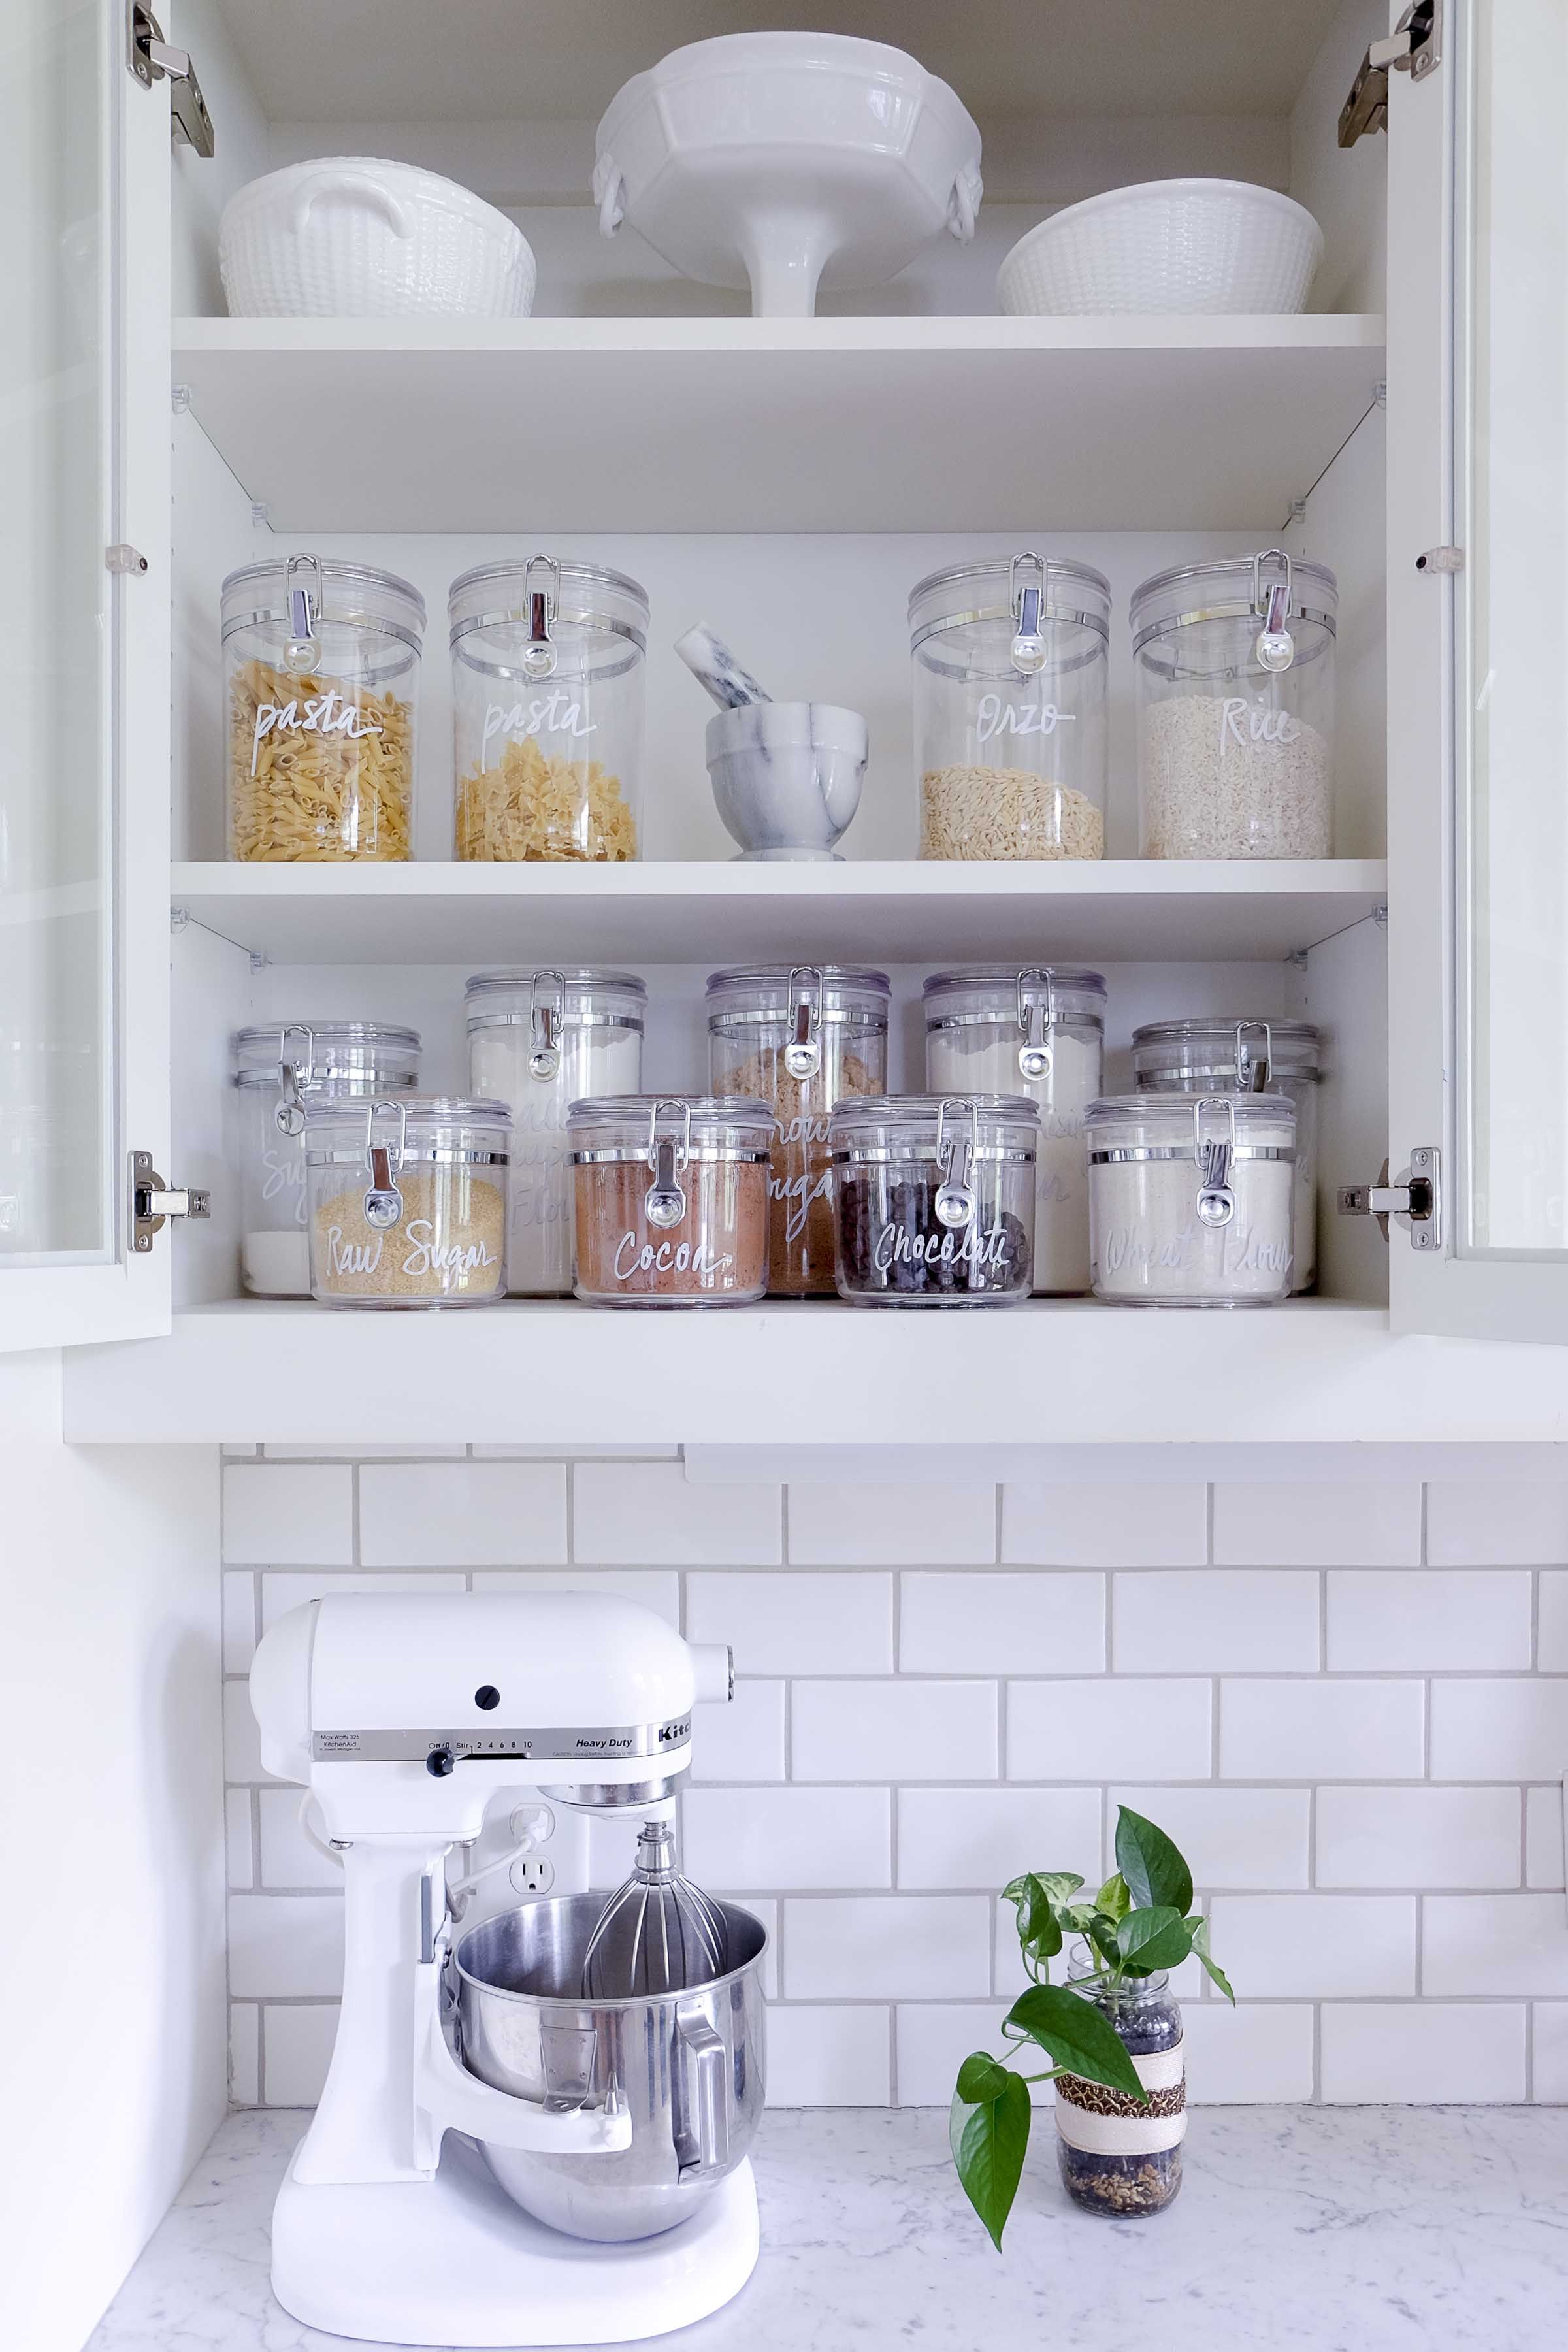 30+ Ways to Declutter Your Kitchen  Home organization, Kitchen organization,  Home diy